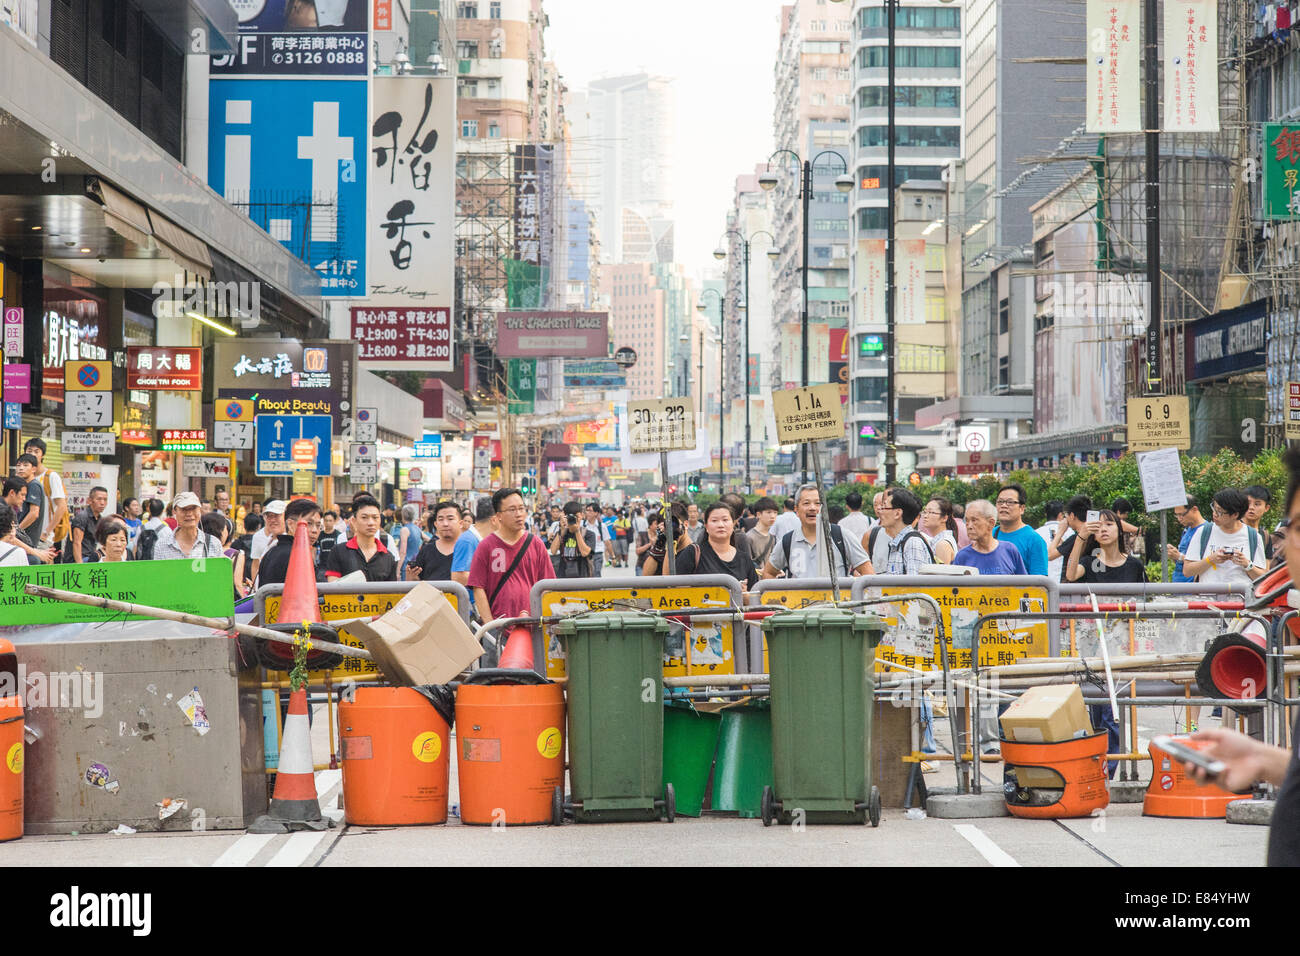 Hong Kong, China. 29th September, 2014. People  are occupying in Causeway Bay and Mongkok, for a democratic election. Credit:  kmt rf/Alamy Live News Stock Photo